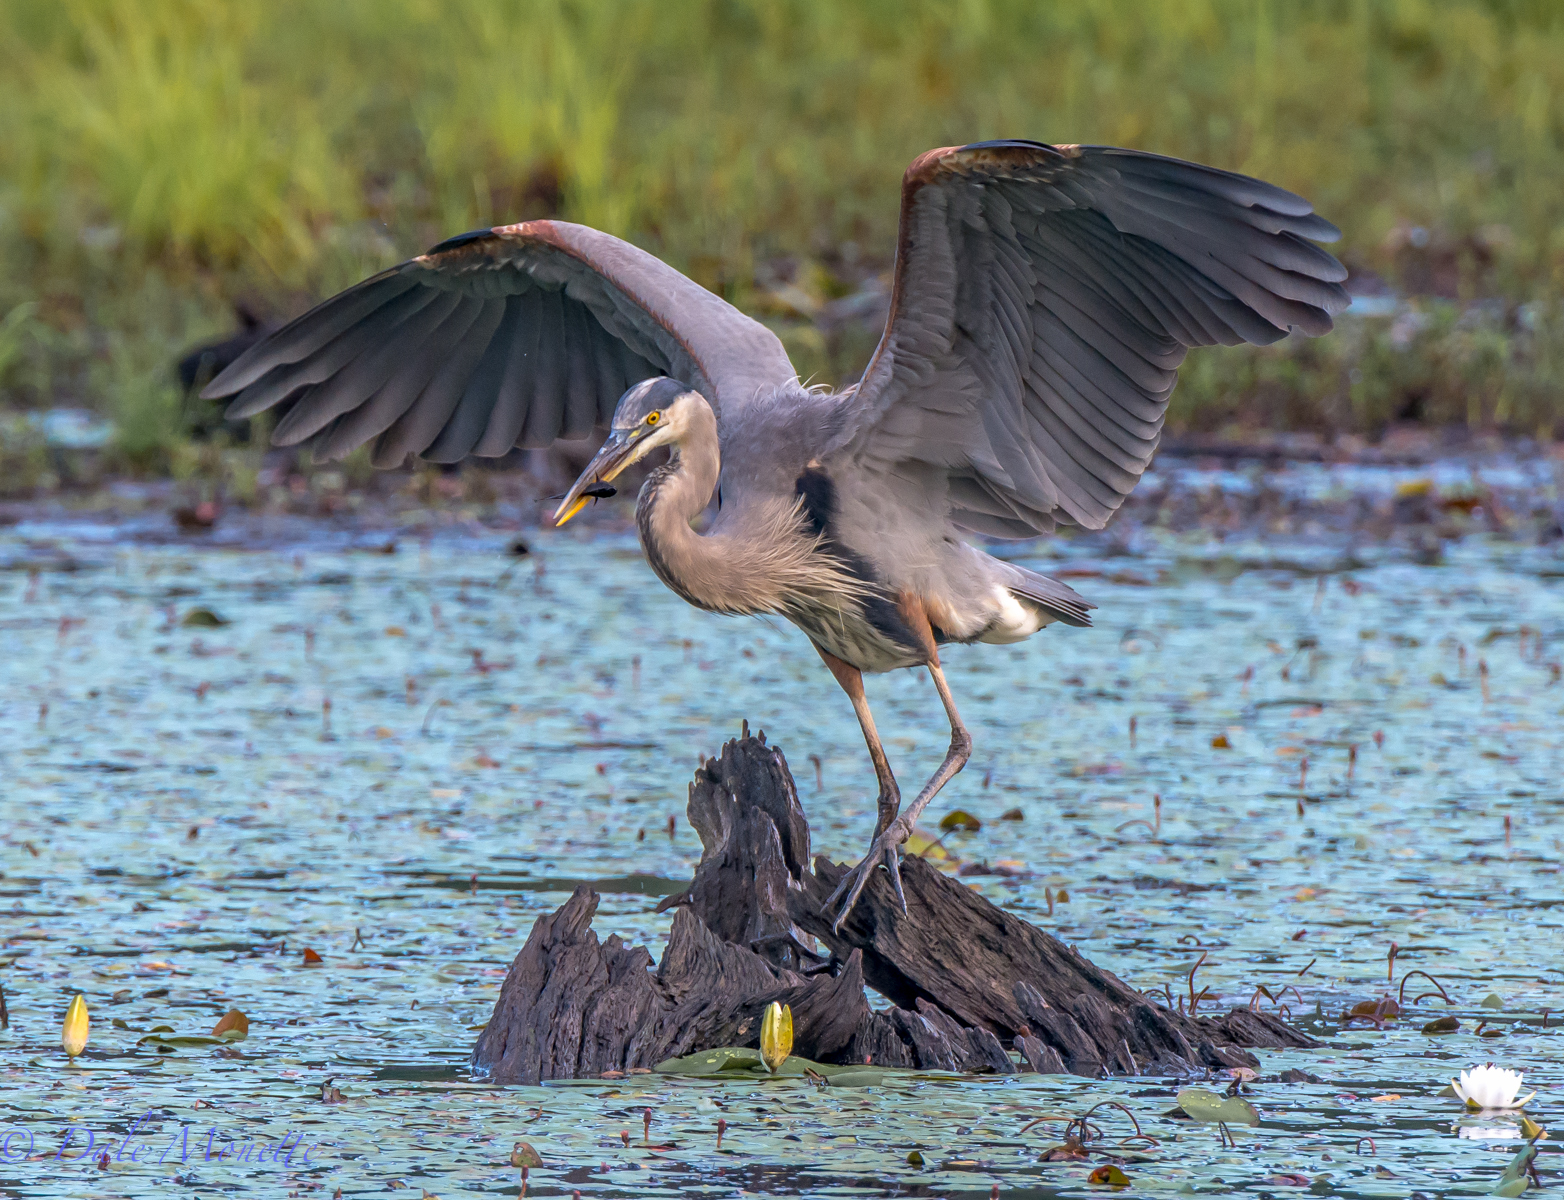 My handsome buddy Gwaark!  the great blue heron has another fish for breakfast today.  8/22/15